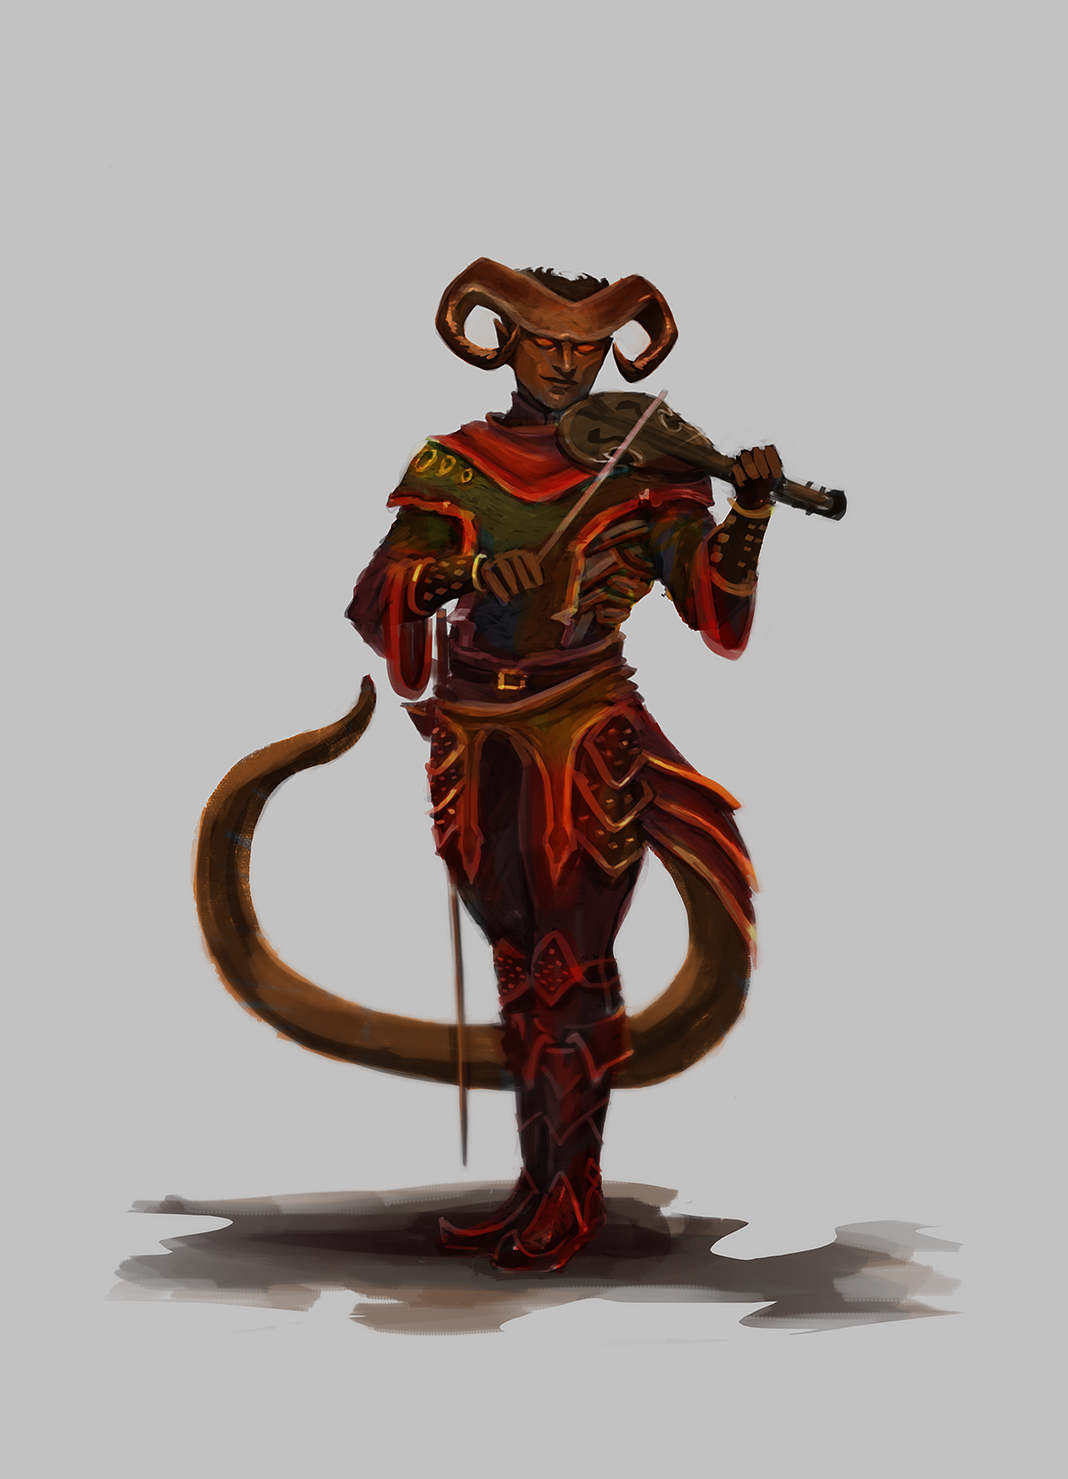 tiefling_bard_by_count_joshula-d9doqp3.j